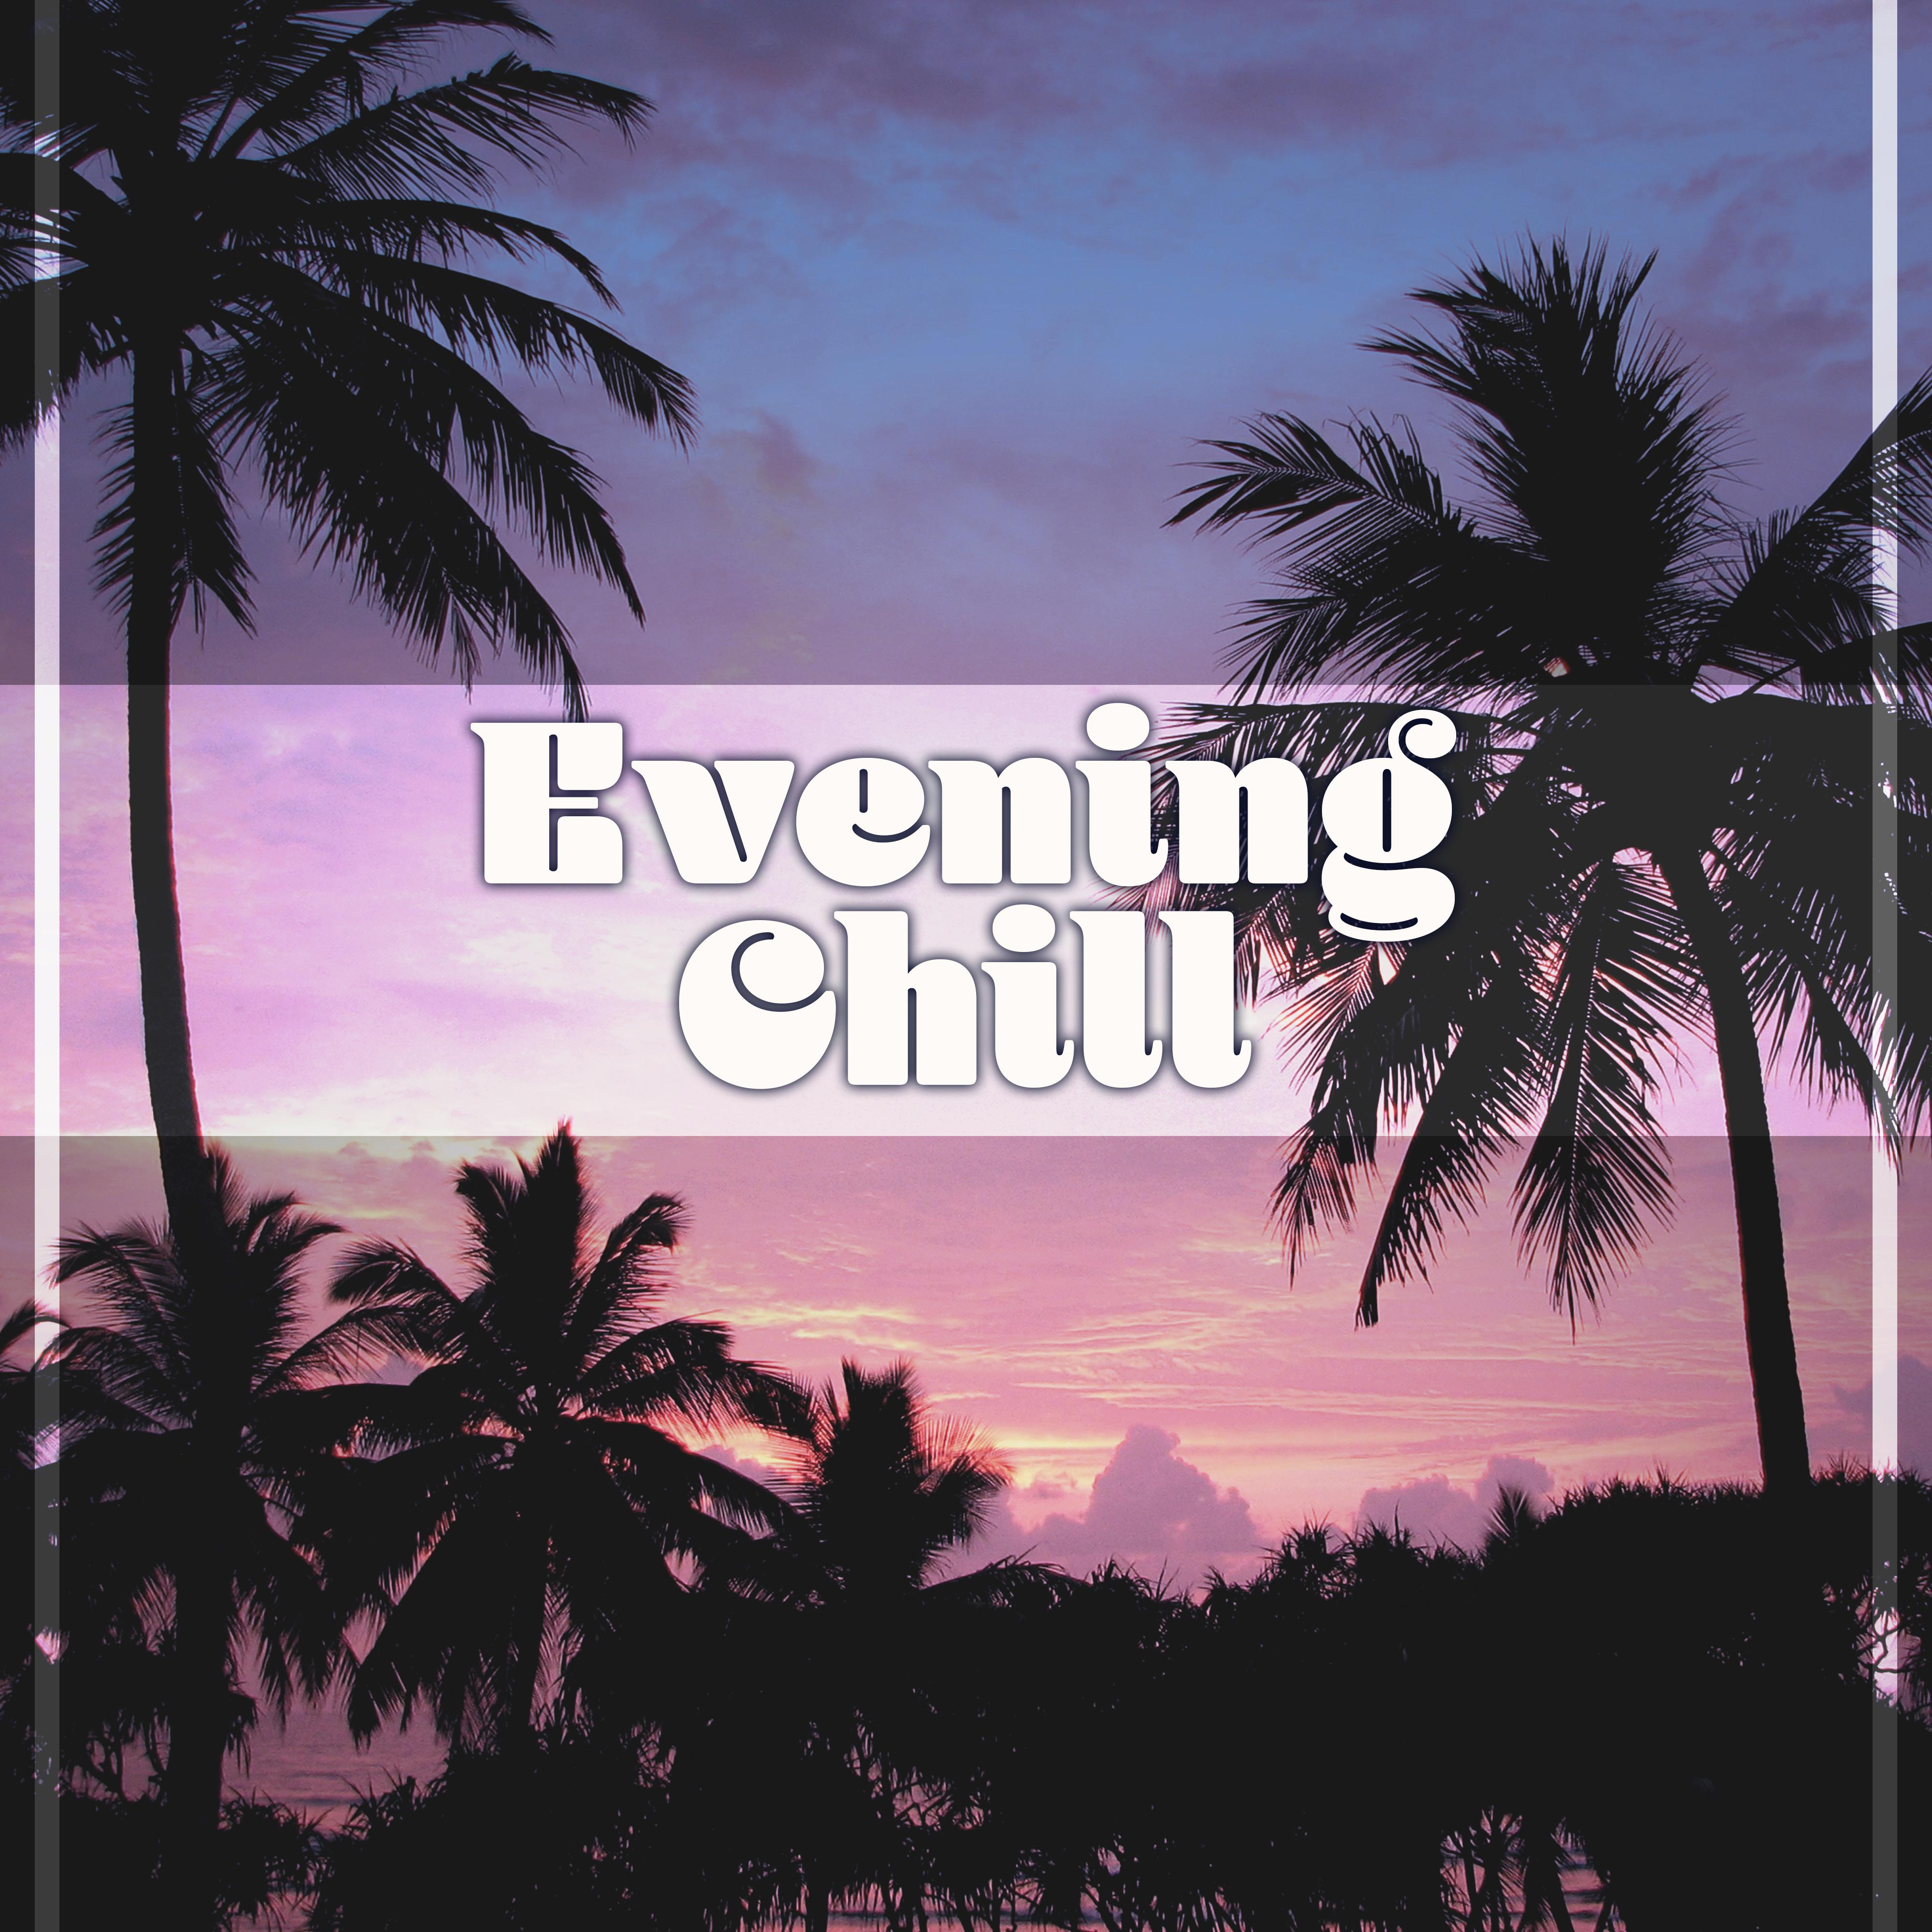 Evening Chill – Summer Songs, Relaxation Time, Beach Party, Chillout Sounds, Ibiza Party